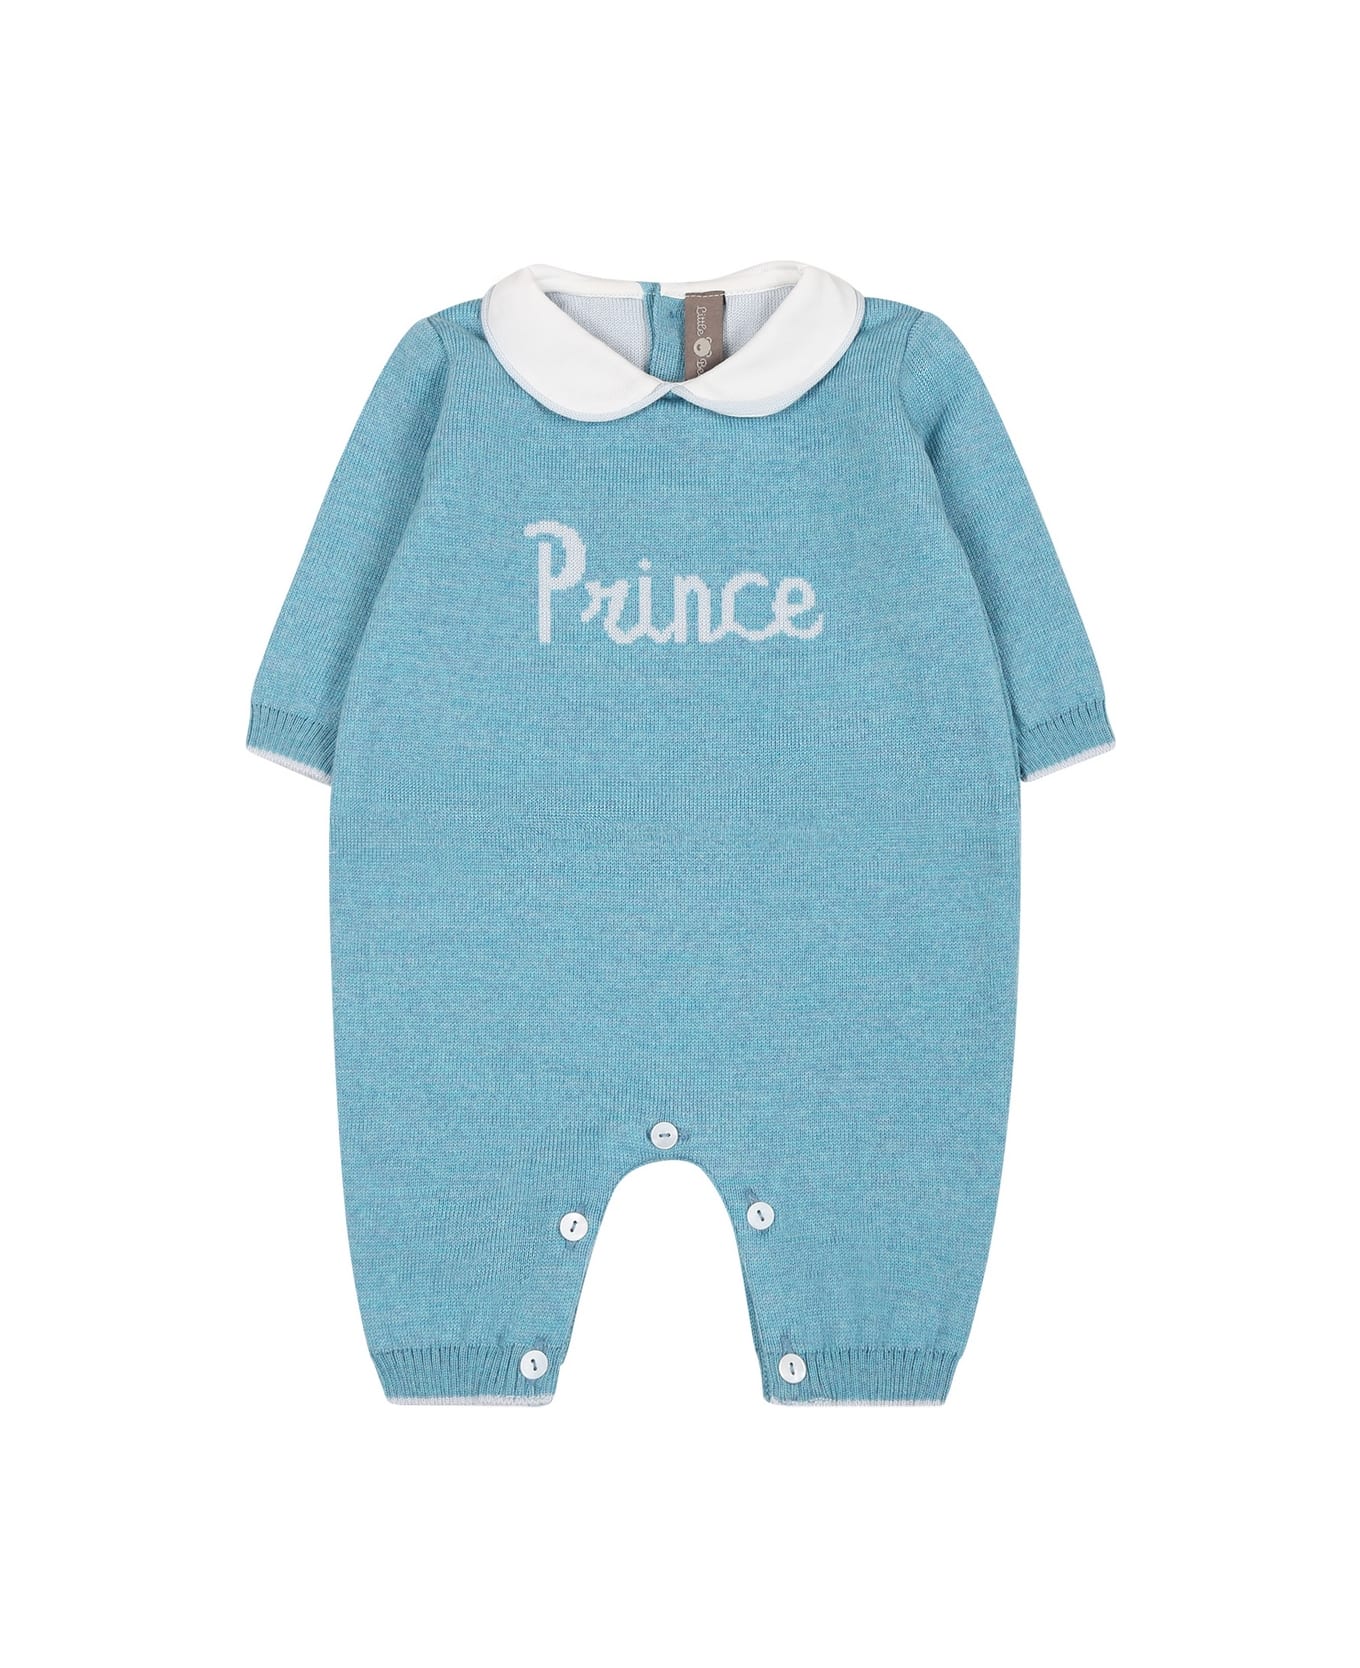 Little Bear Light Blue Babygrown For Baby Boy With Embroidered "prince" Writing - Light Blue ボディスーツ＆セットアップ